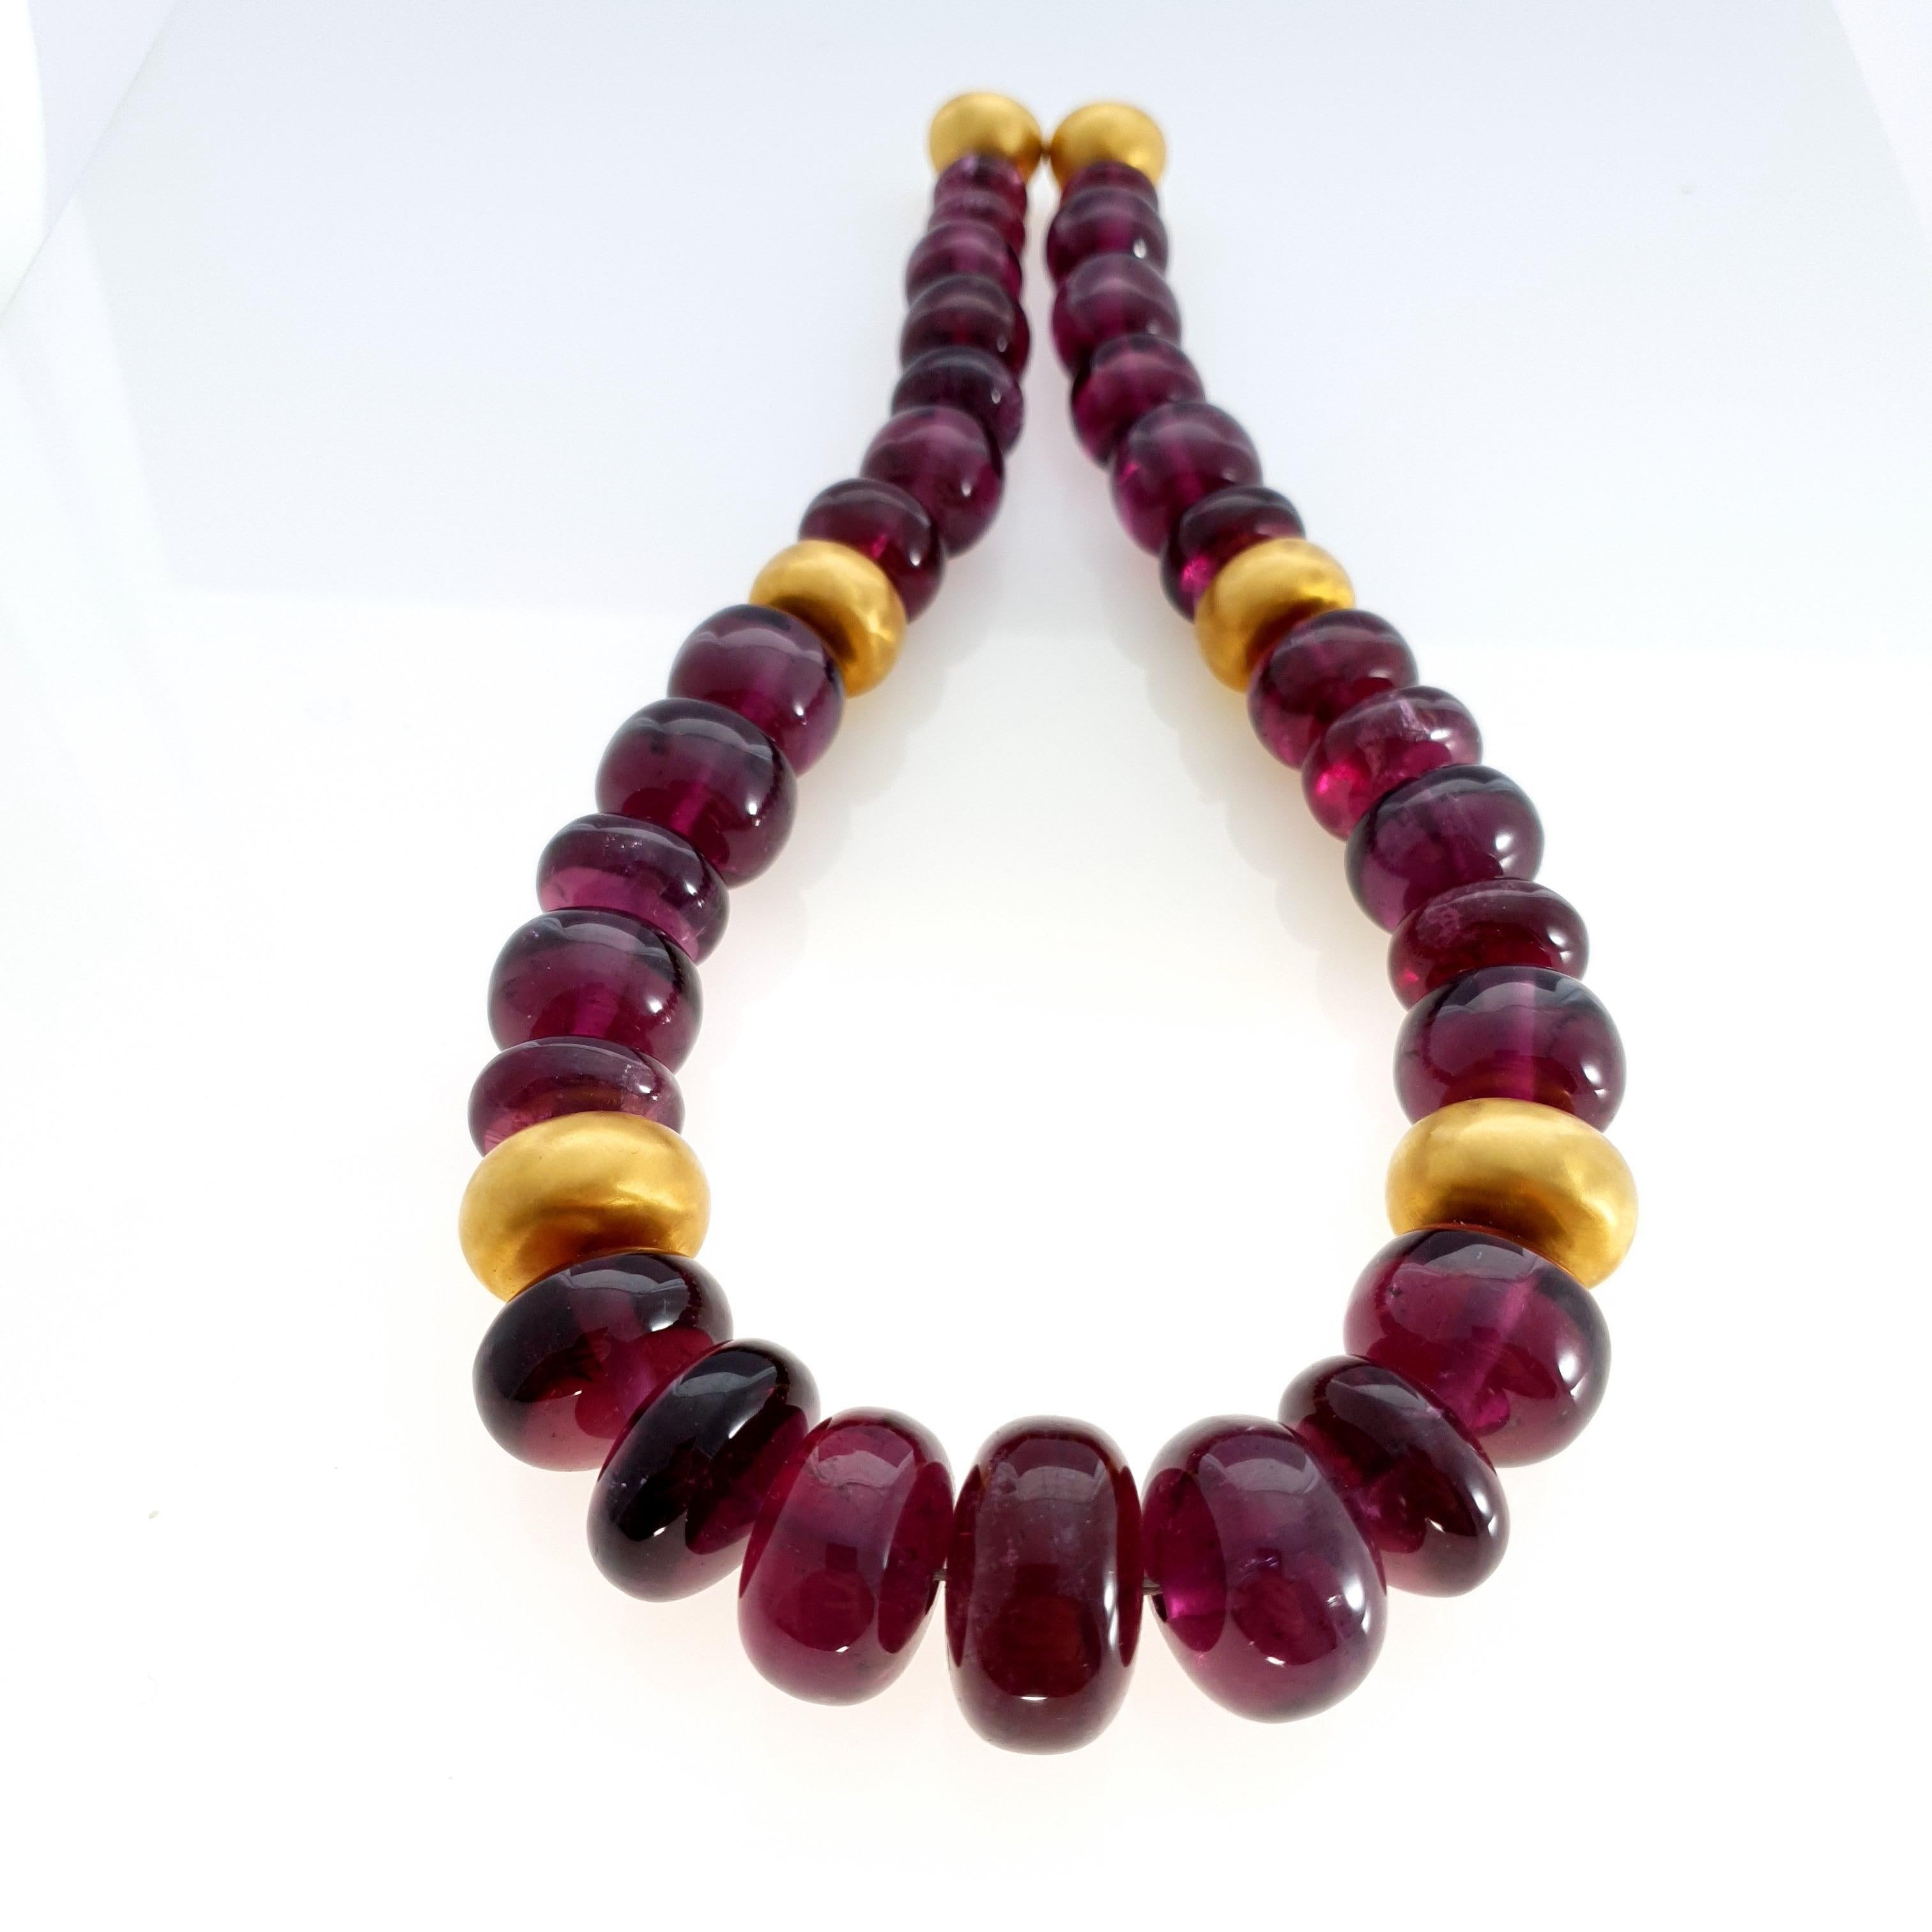 Big Purple Rubelite Tourmaline Rondel Beaded Necklace with 18 Carat Yellow Gold For Sale 2